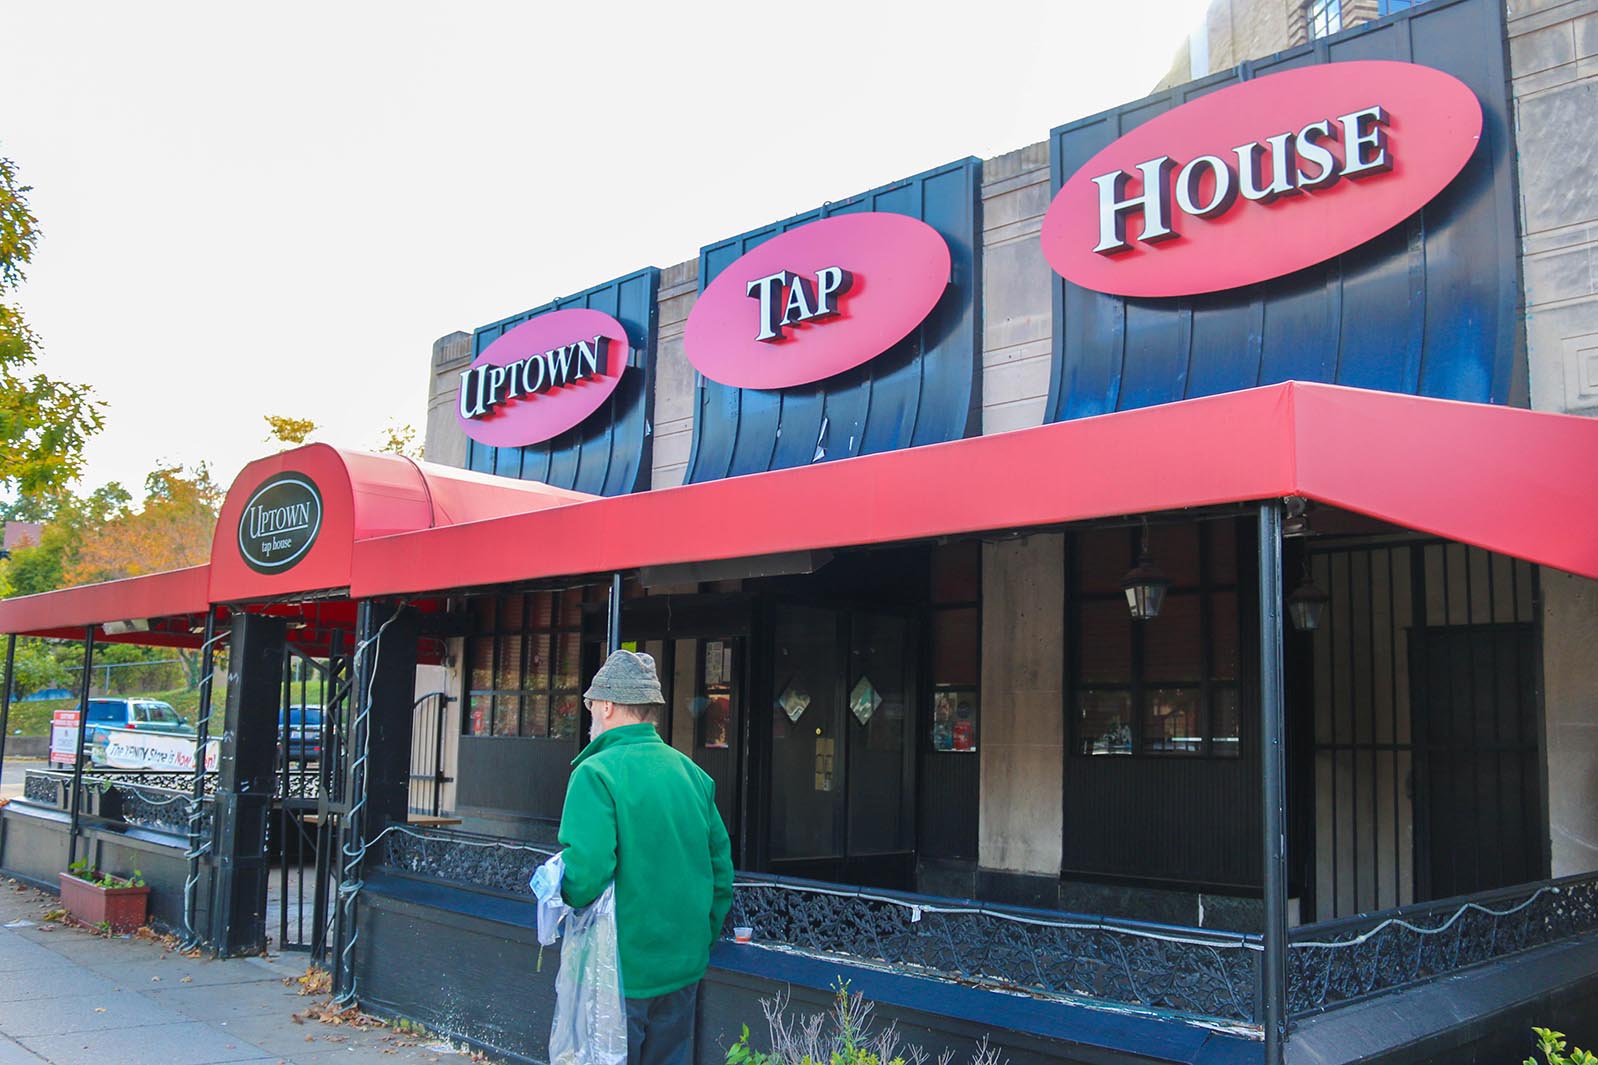 Uptown Tap House in Cleveland Park, Washington, DC